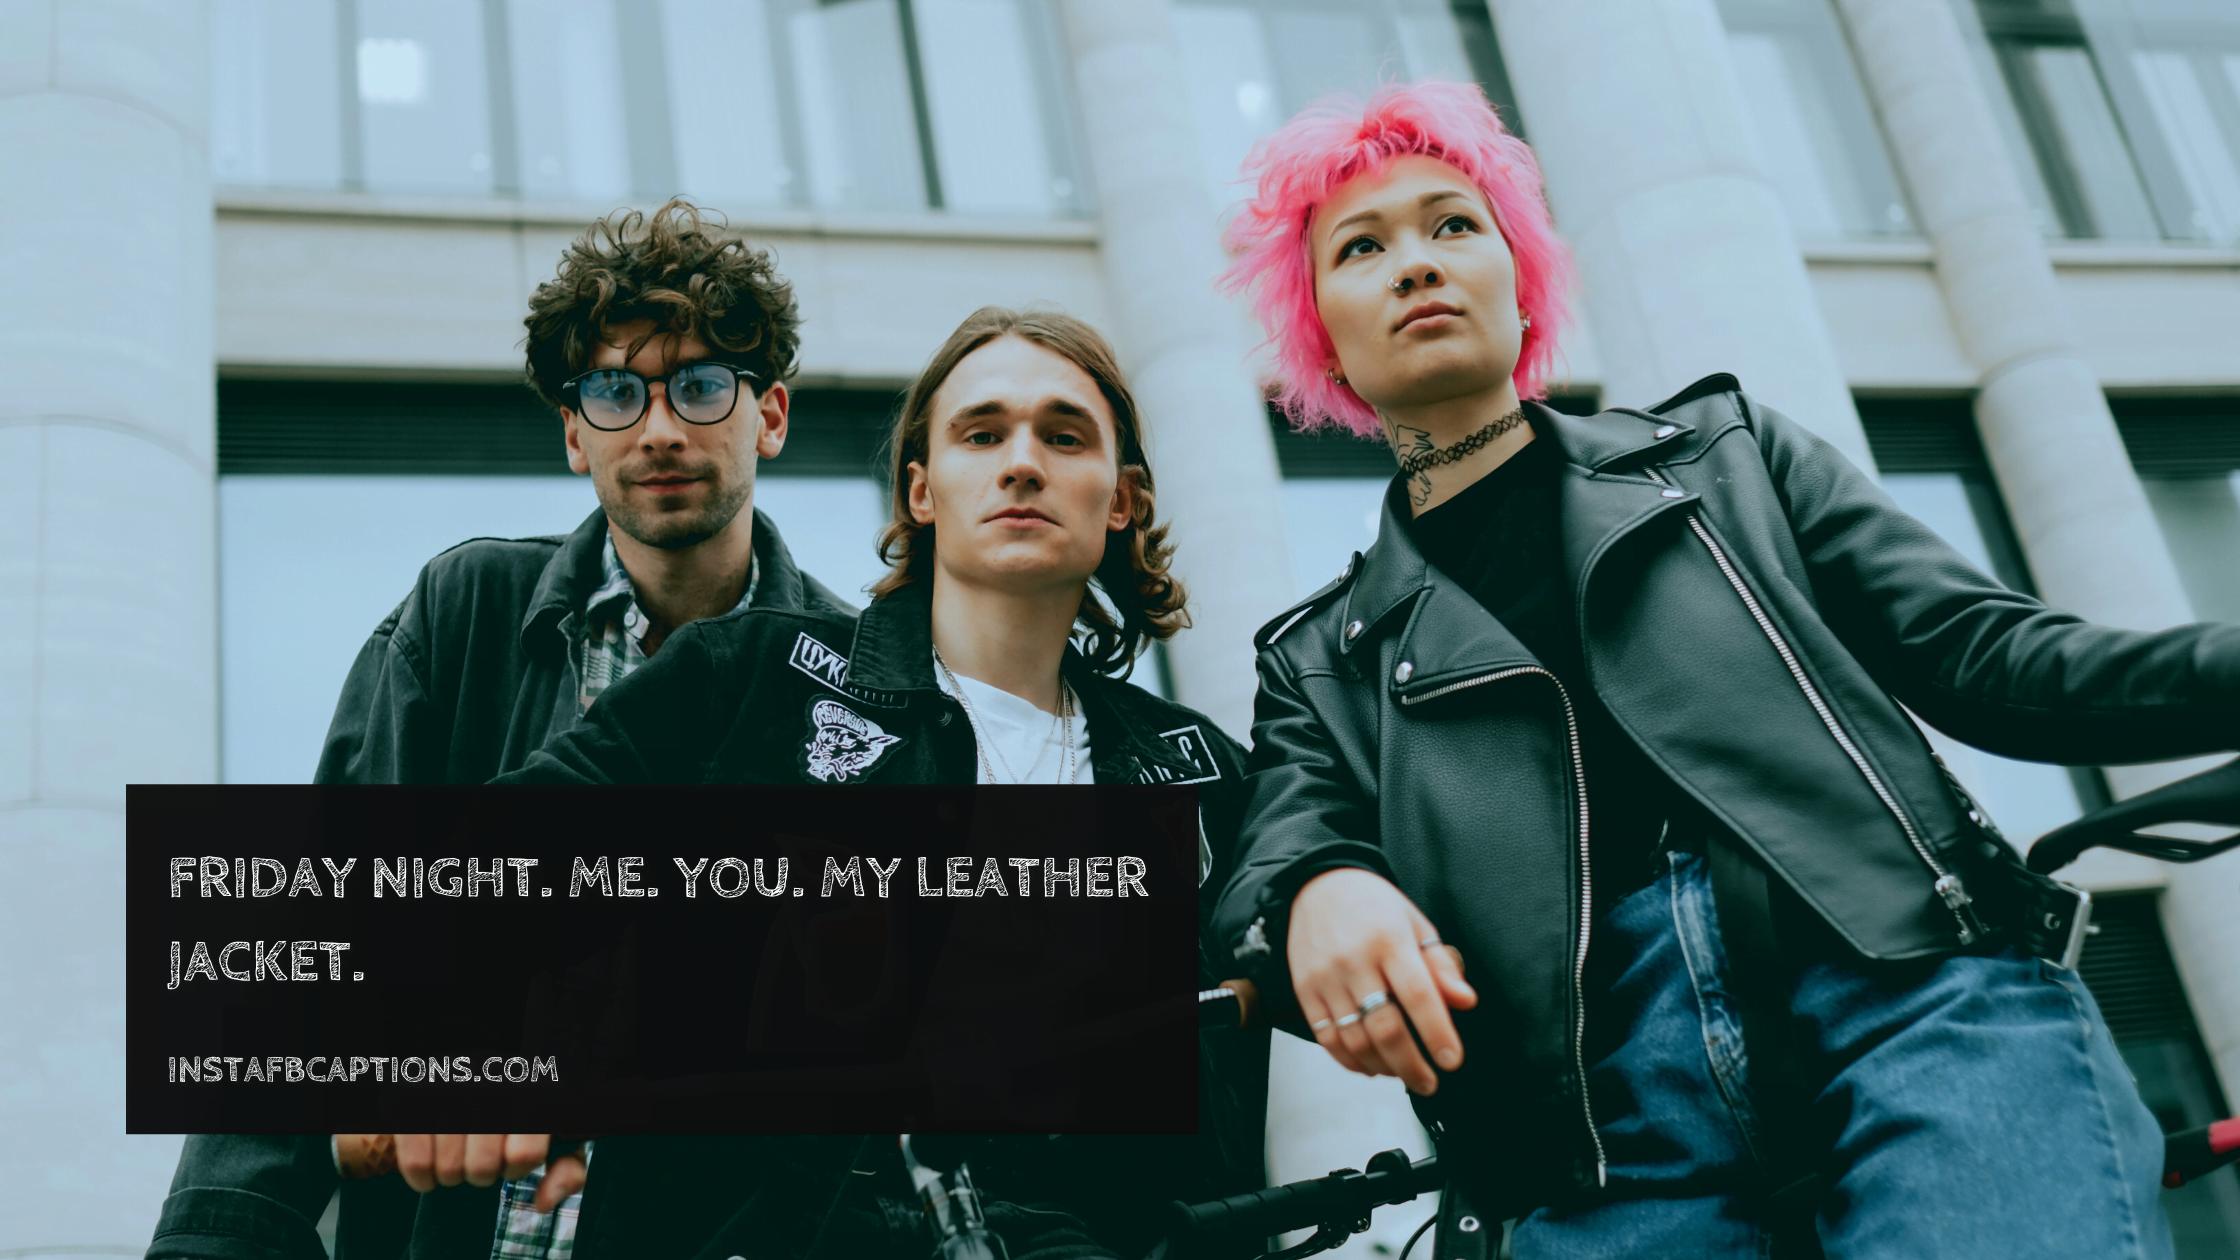 Cool Leather Jacket Captions  - Cool Leather Jacket Captions  - 107 Instagram Captions for Leather Jacket Pics in 2022